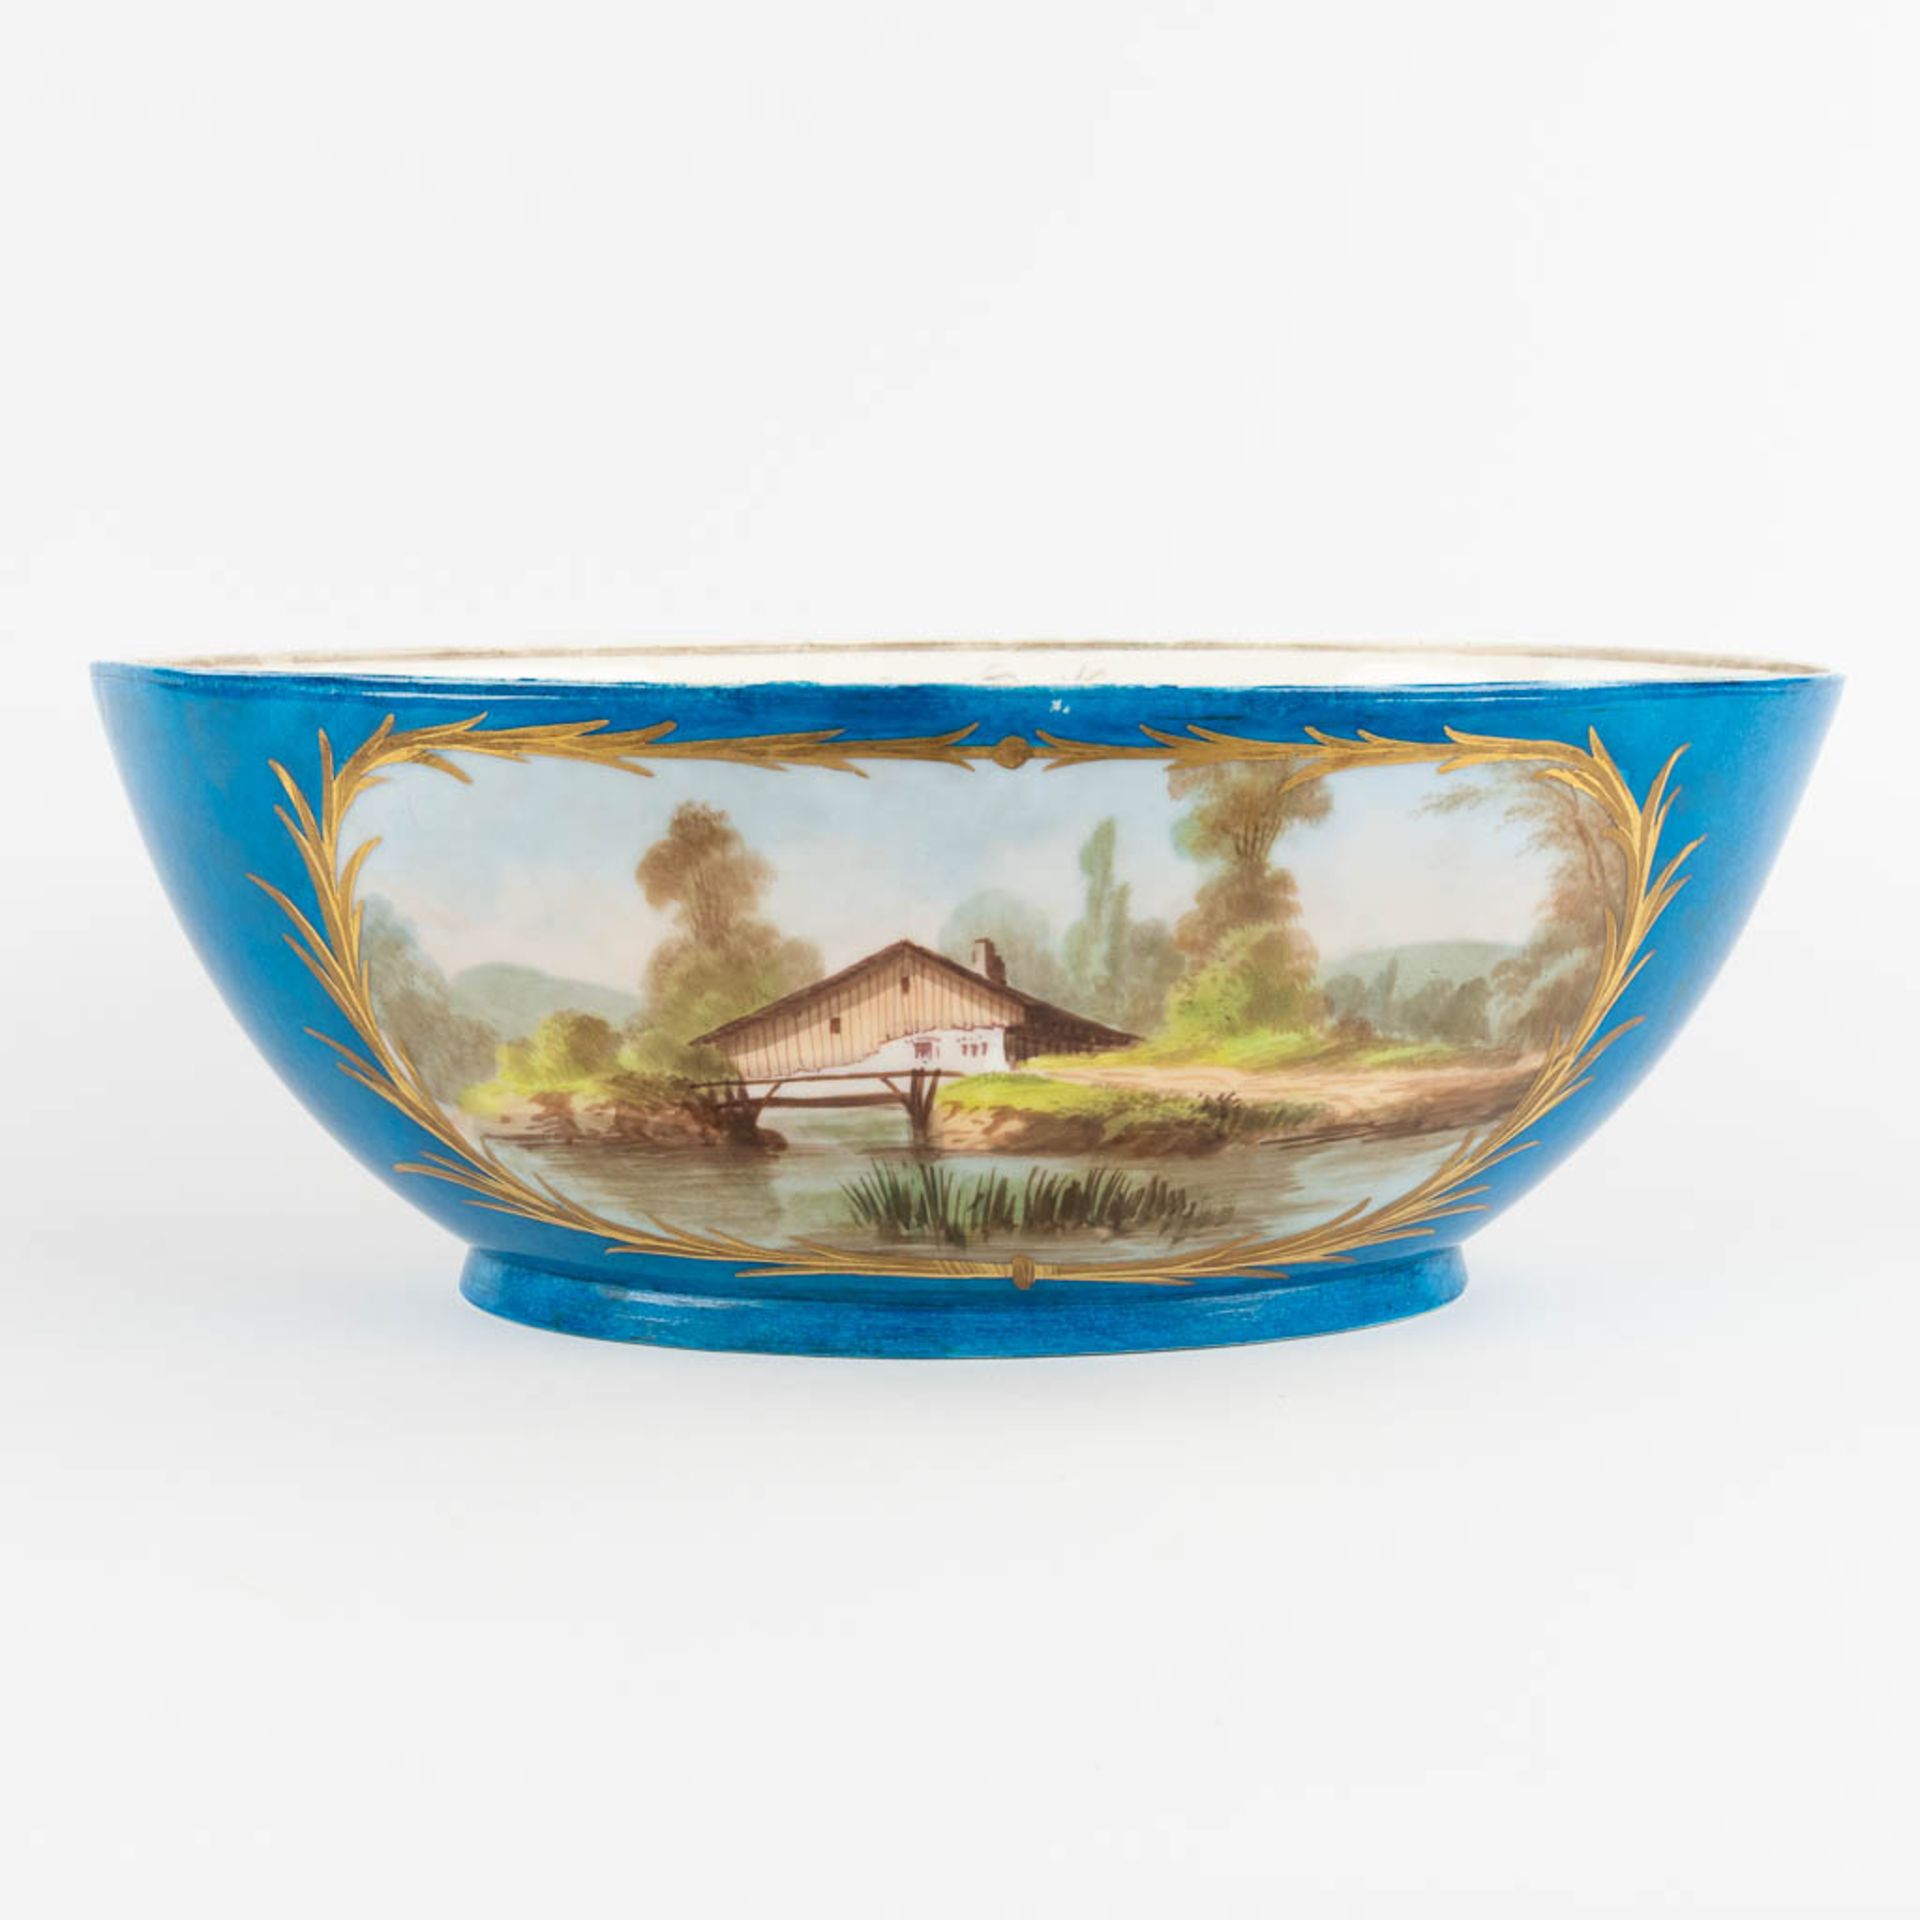 A large bowl, blue glaze with hand-painted decor, probably Limoges. (L:24 x W:39 x H:14 cm) - Image 5 of 12